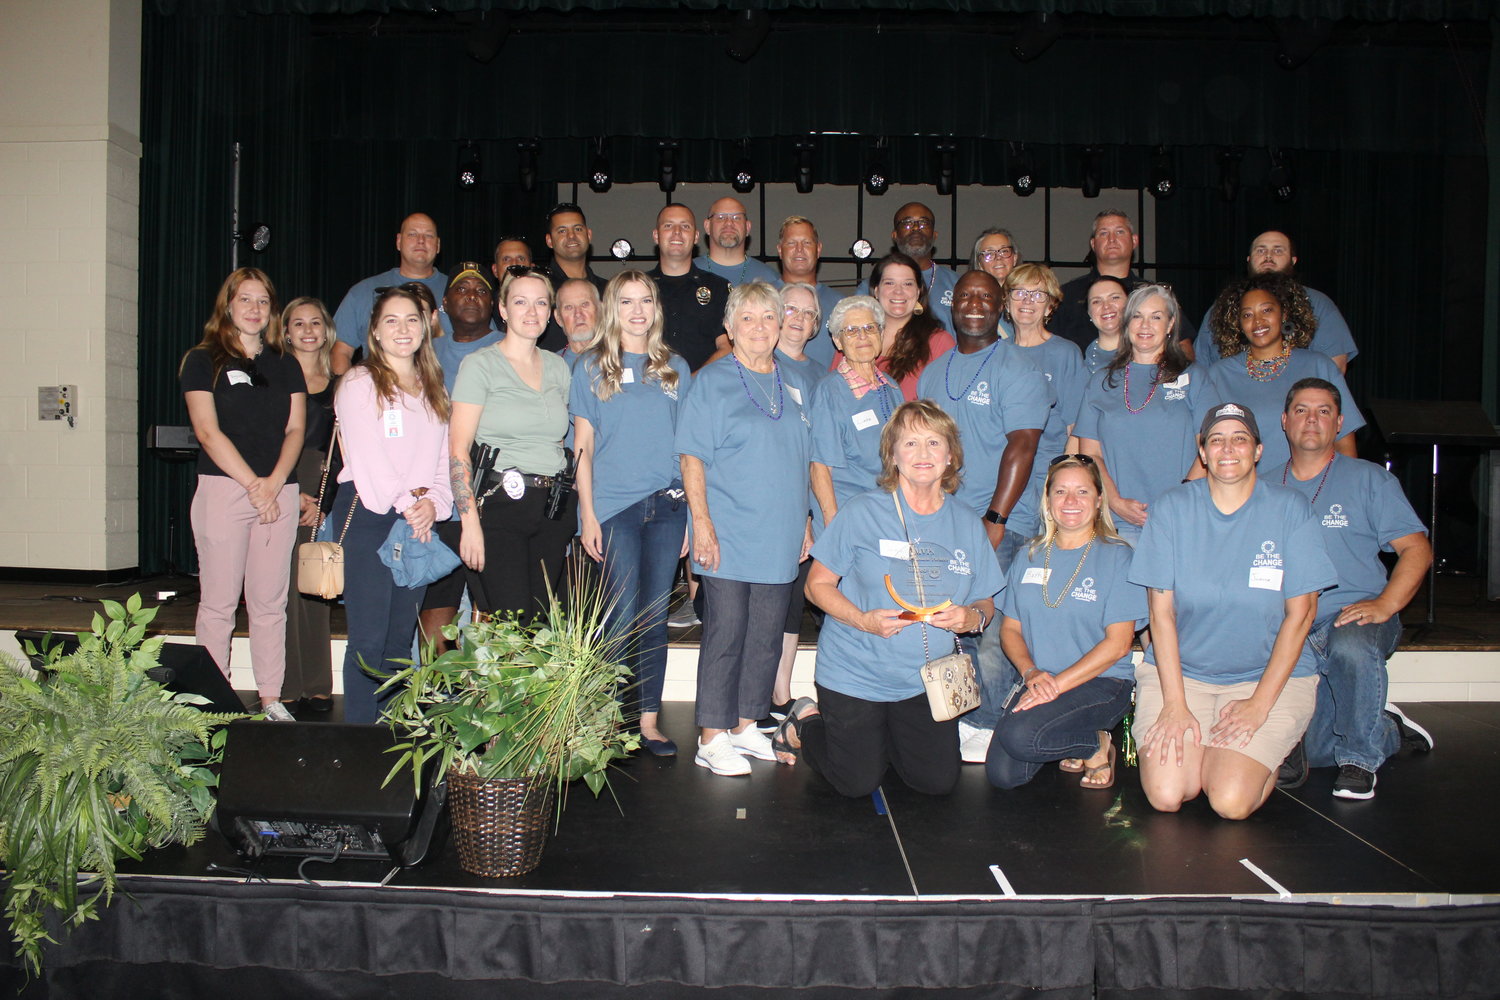 The town of Hope Mills administration-government won the MVPs award – Most Valuable Packers - because it had 29 volunteers sign up to help package meals during United Way of Cumberland County's second annual meal packing campaign kickoff Thursday at Snyder Memorial Baptist Church.